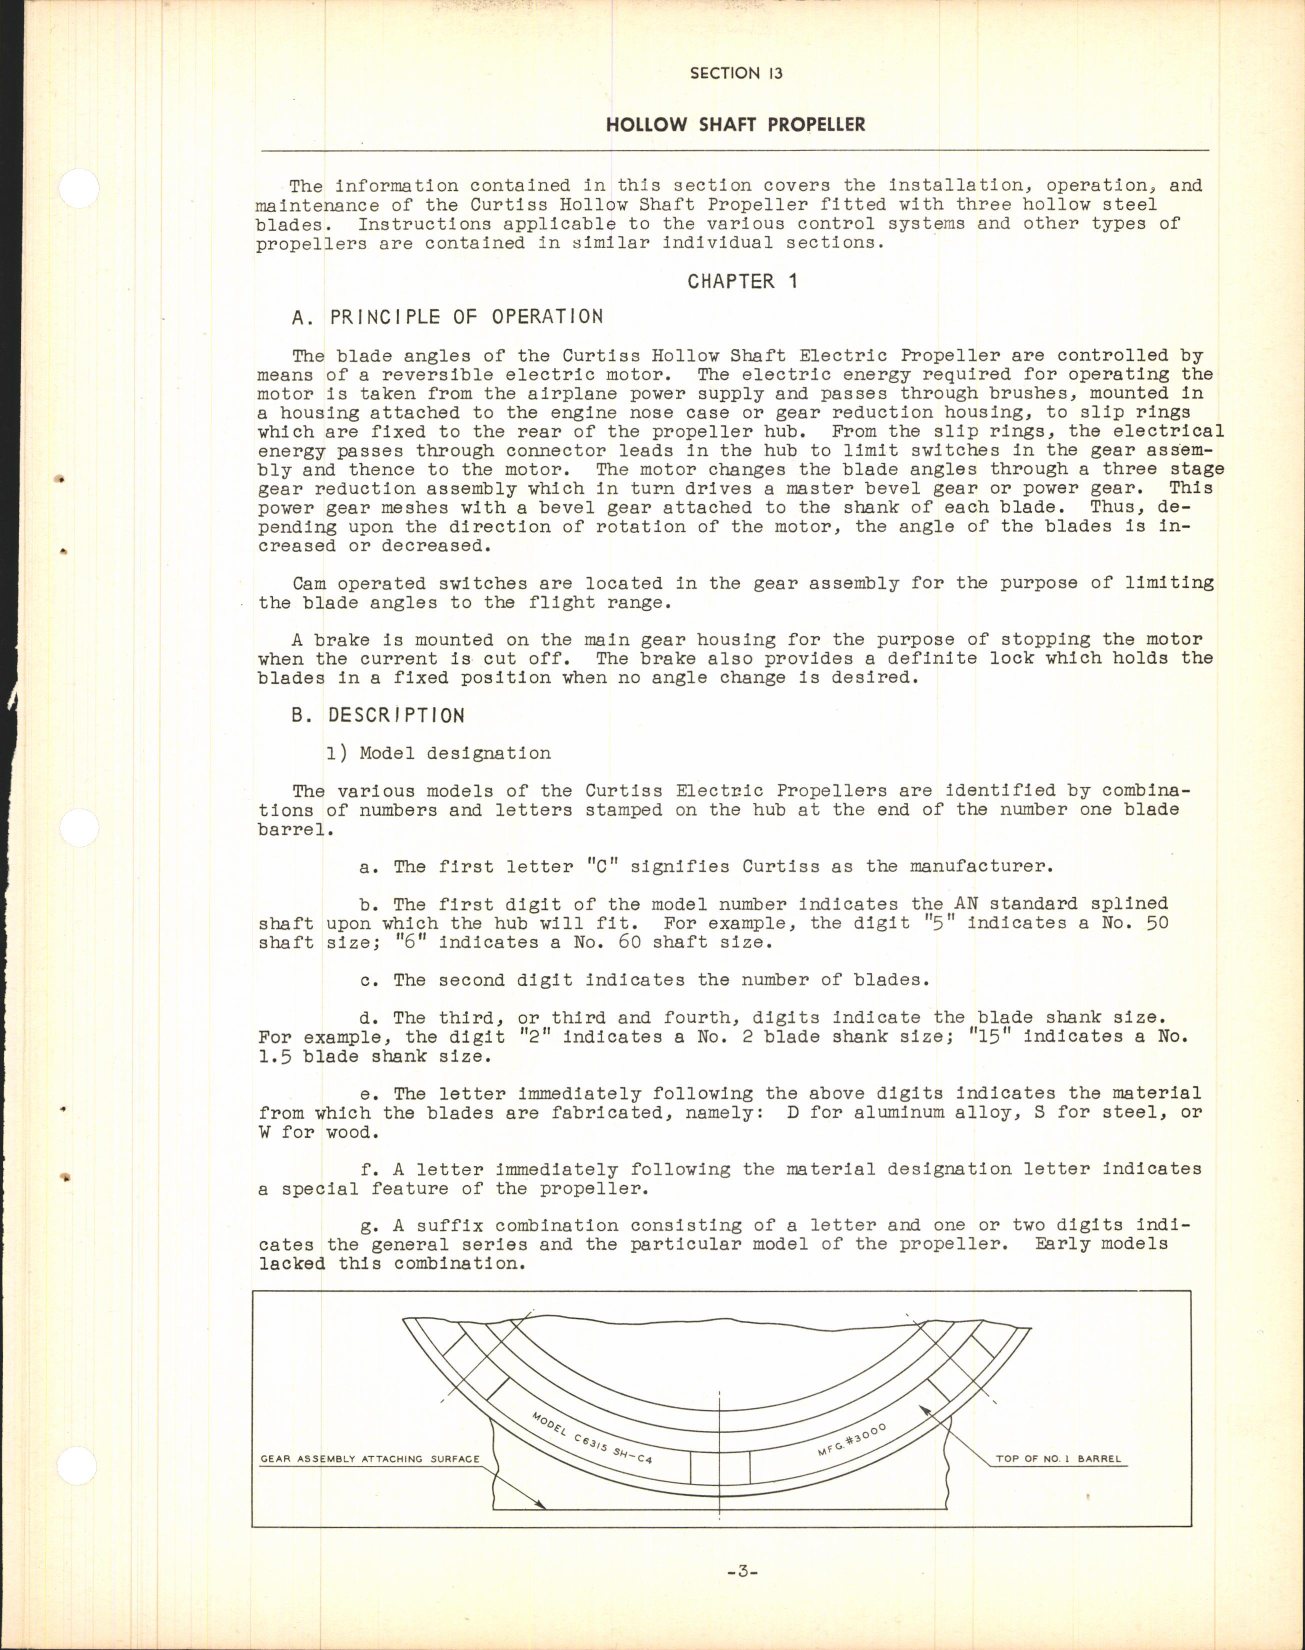 Sample page 5 from AirCorps Library document: Section 13 - Hollow Shaft Propeller (Three Blade)